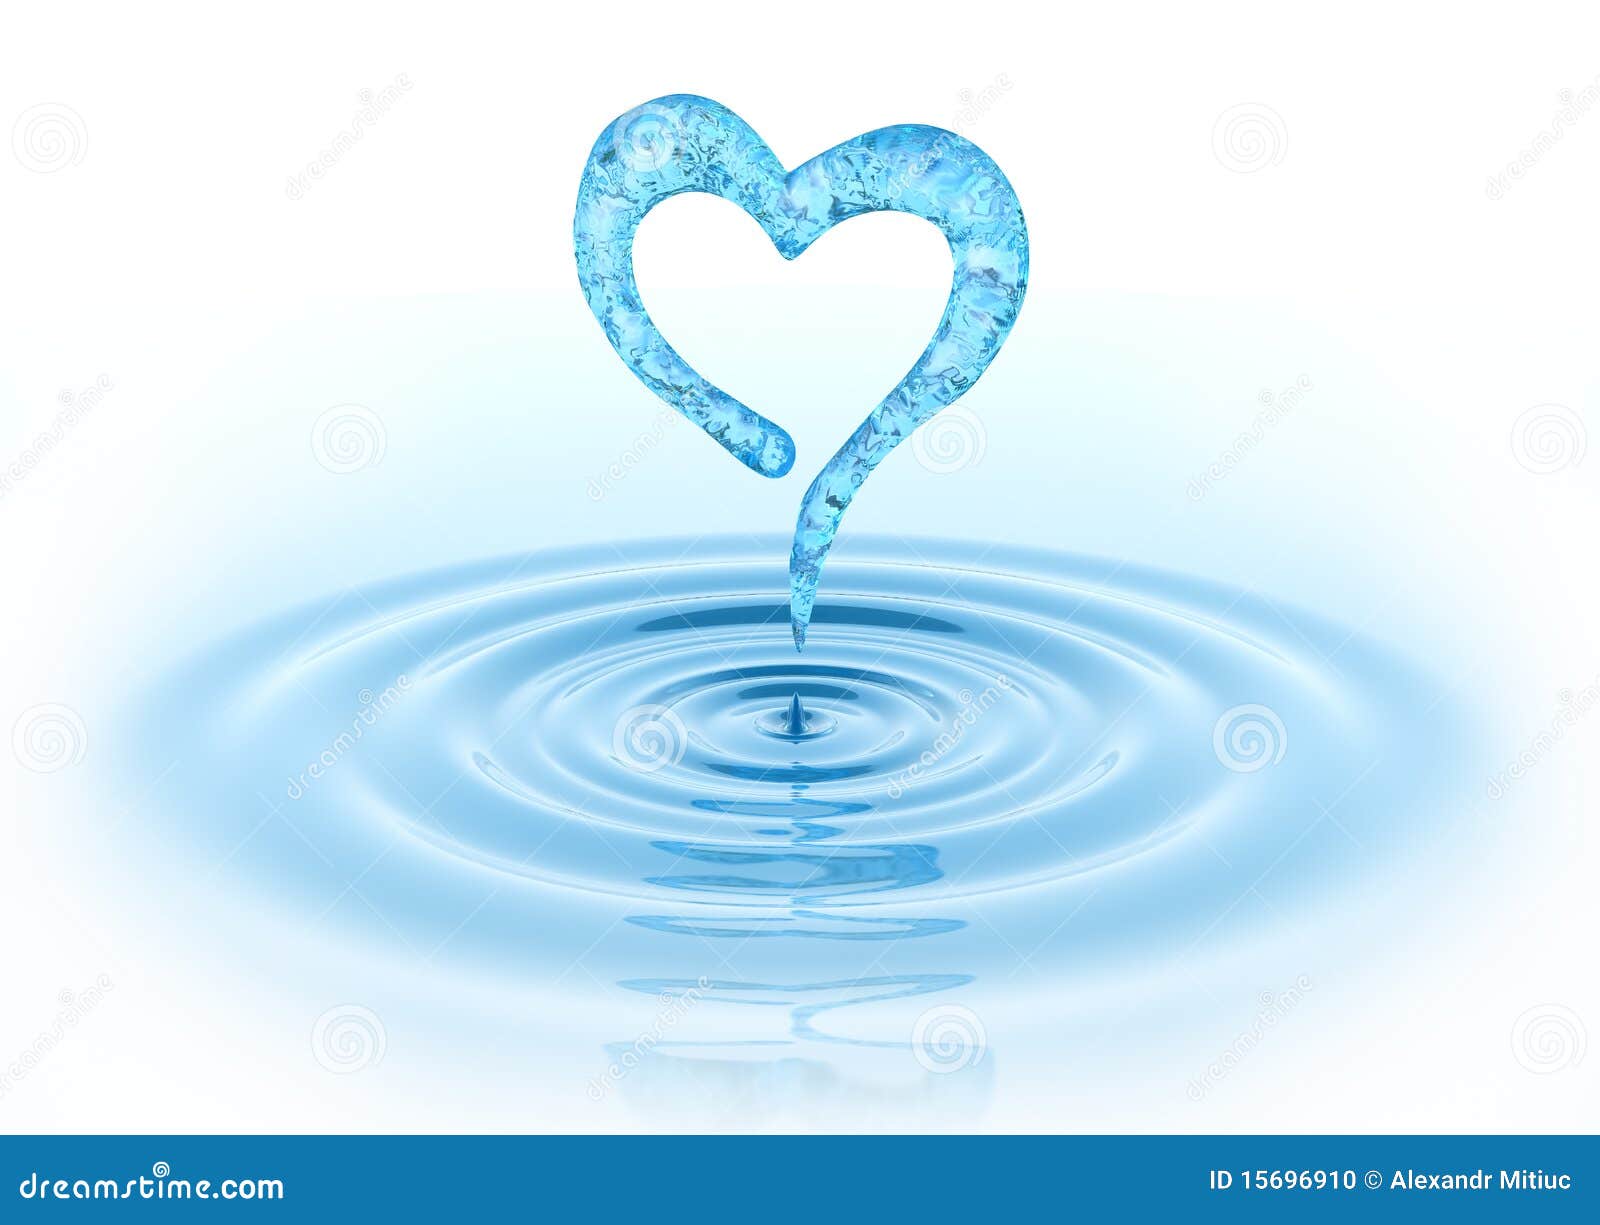 waterdrop and heart